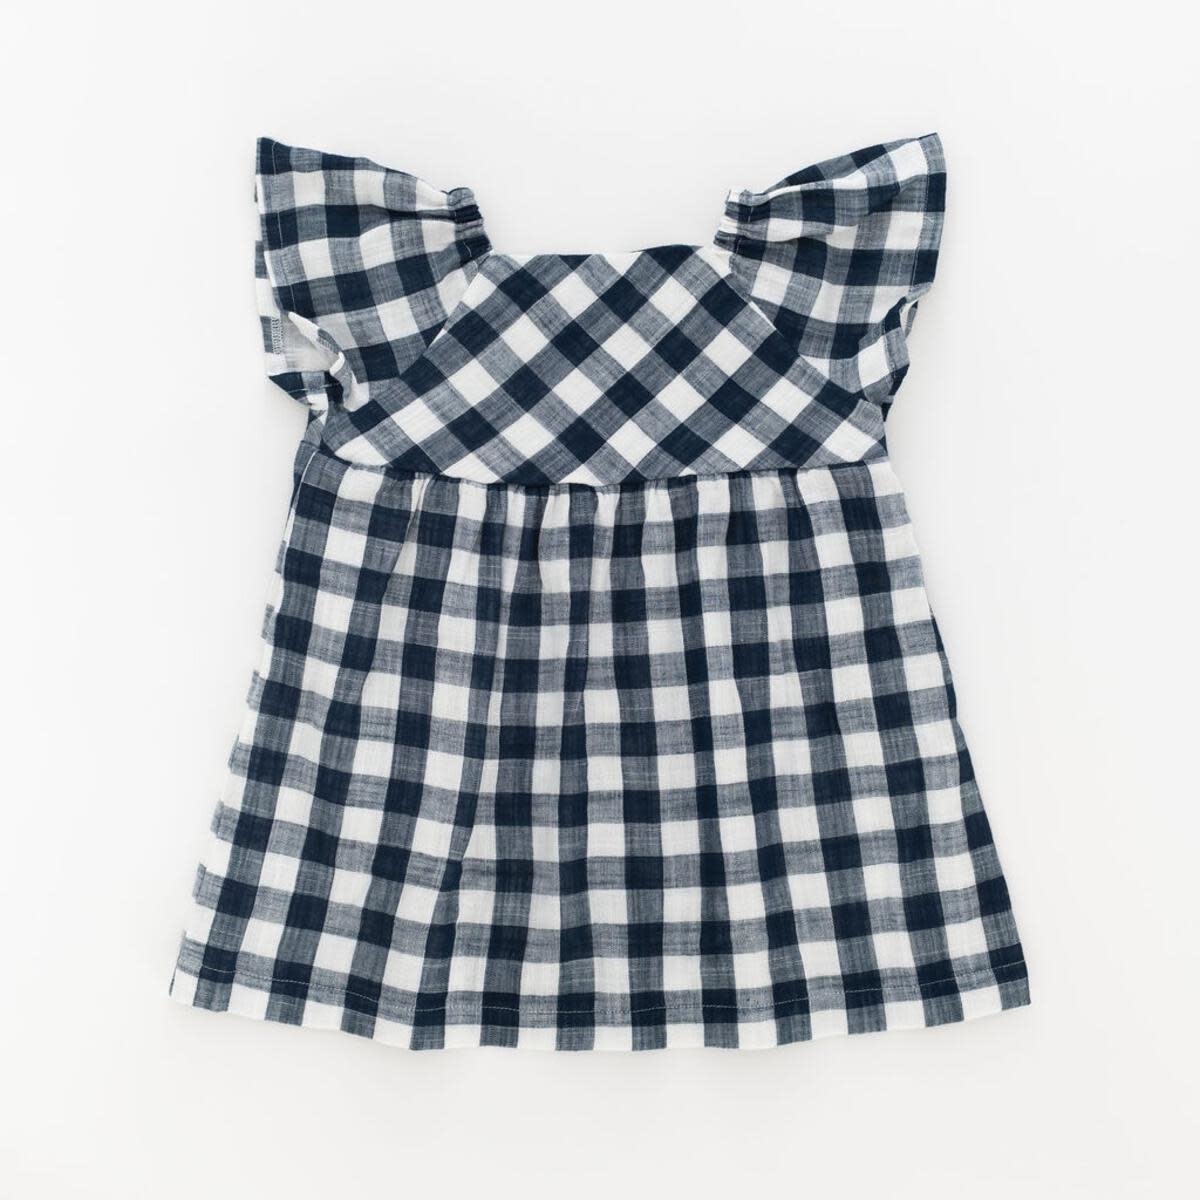 Thimble Thimble Empire Tunic in Midnight Gingham